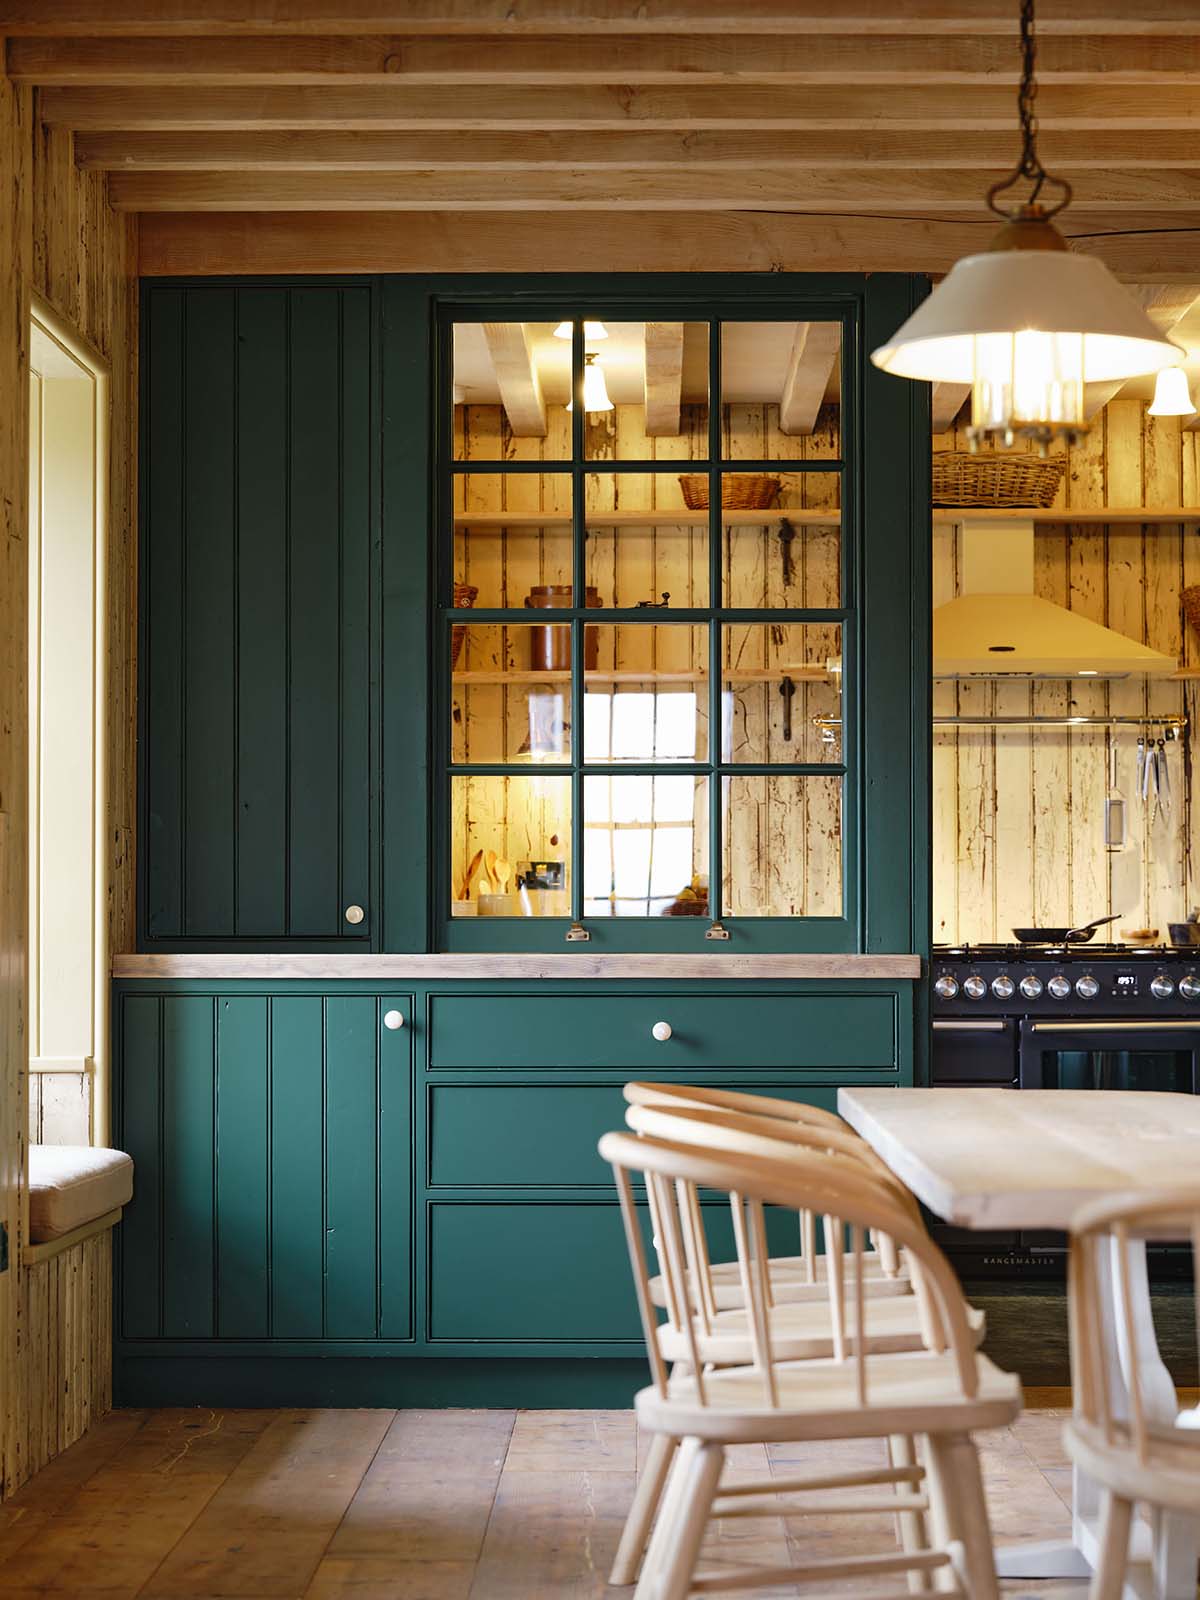 The captain's house on the Isle of Harris features a green panelled breakfast room for communal dining